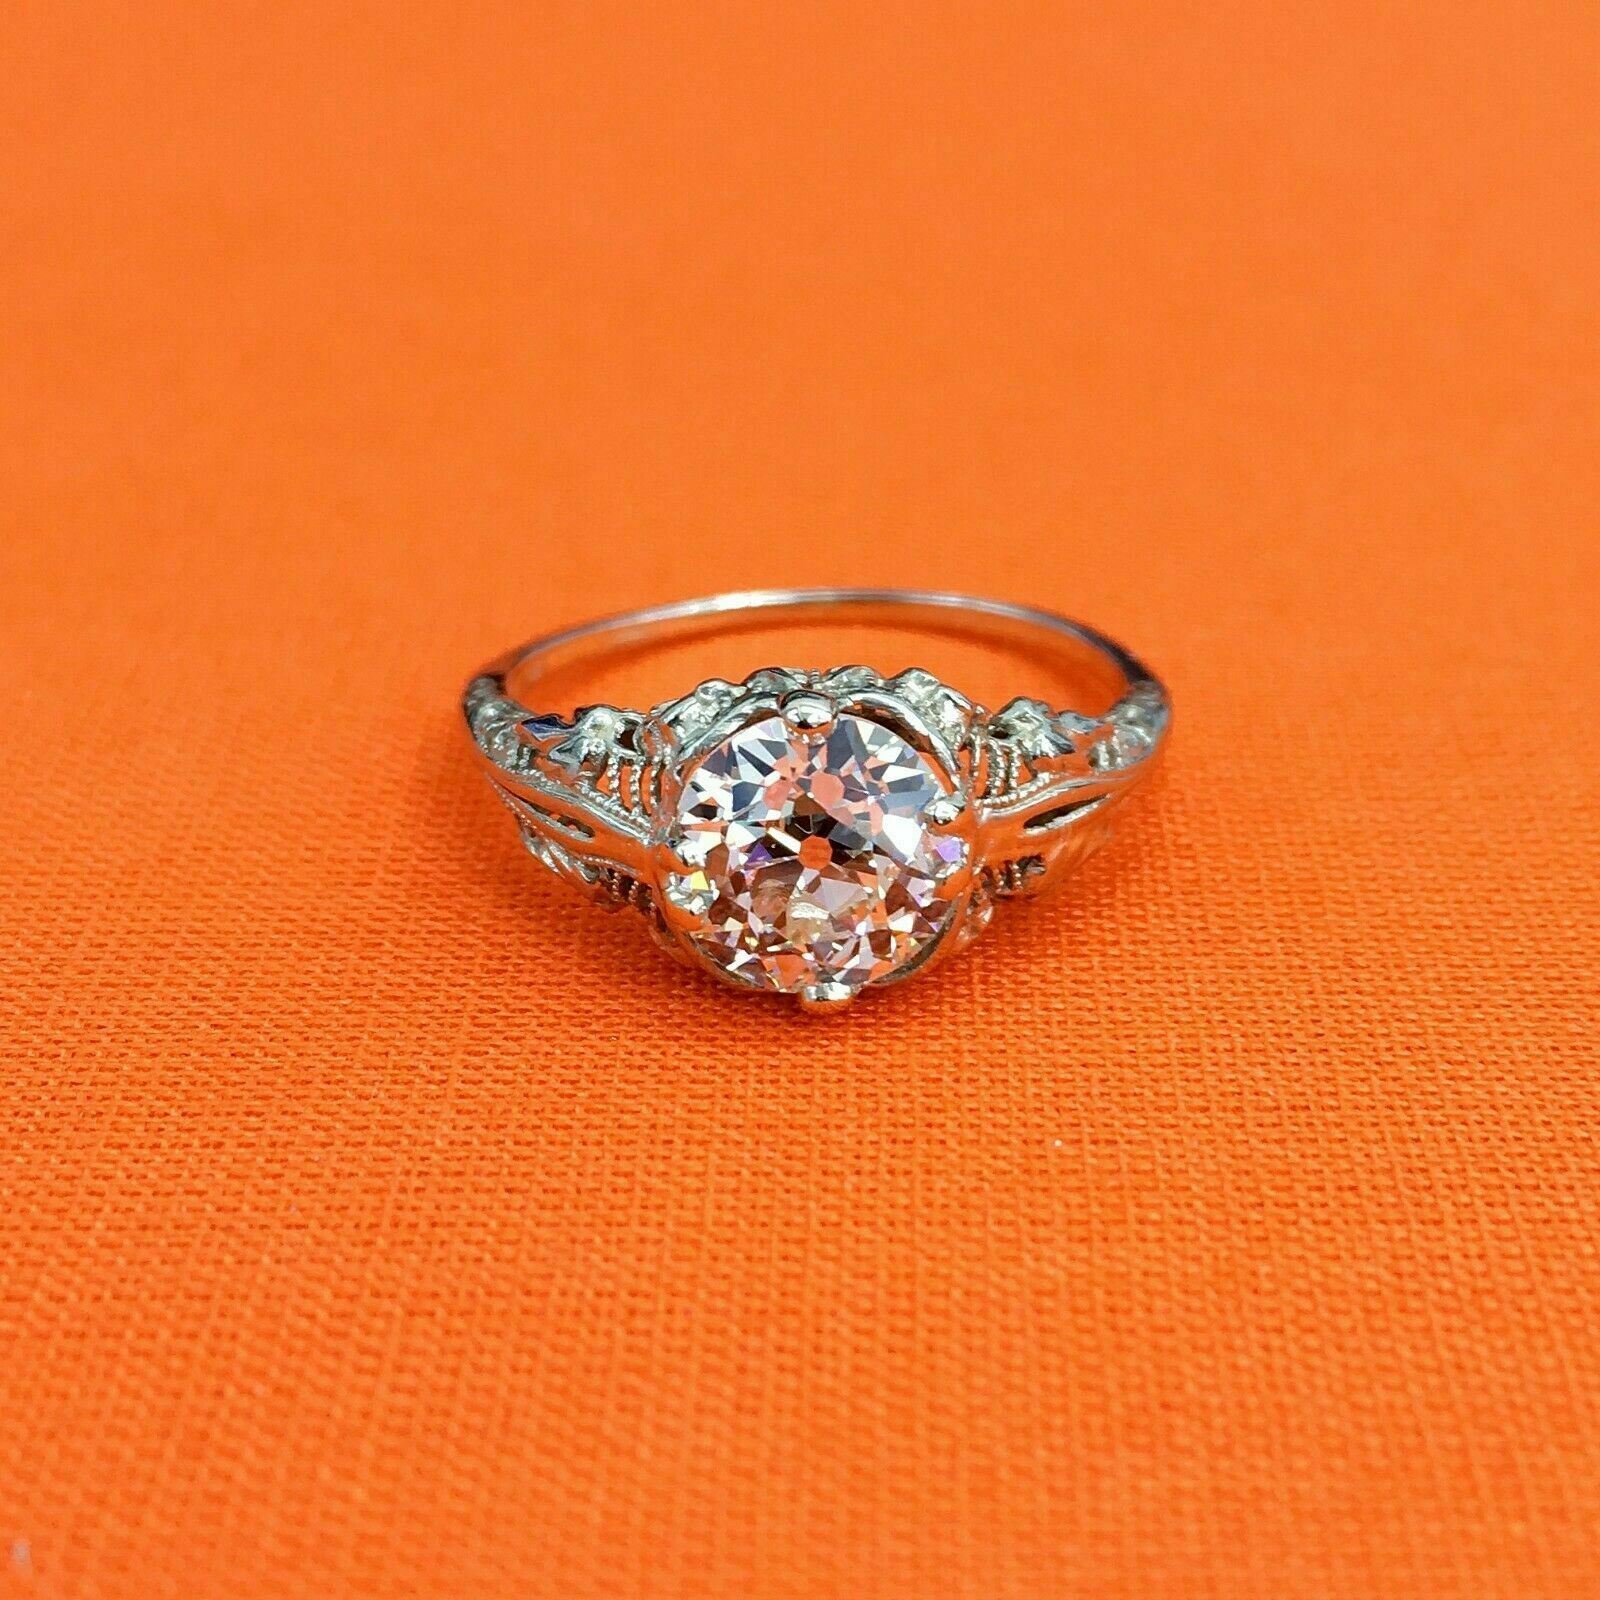 1.88 Carats Antique Art Deco Solitaire Diamond Ring GIA Certificate Included 50s